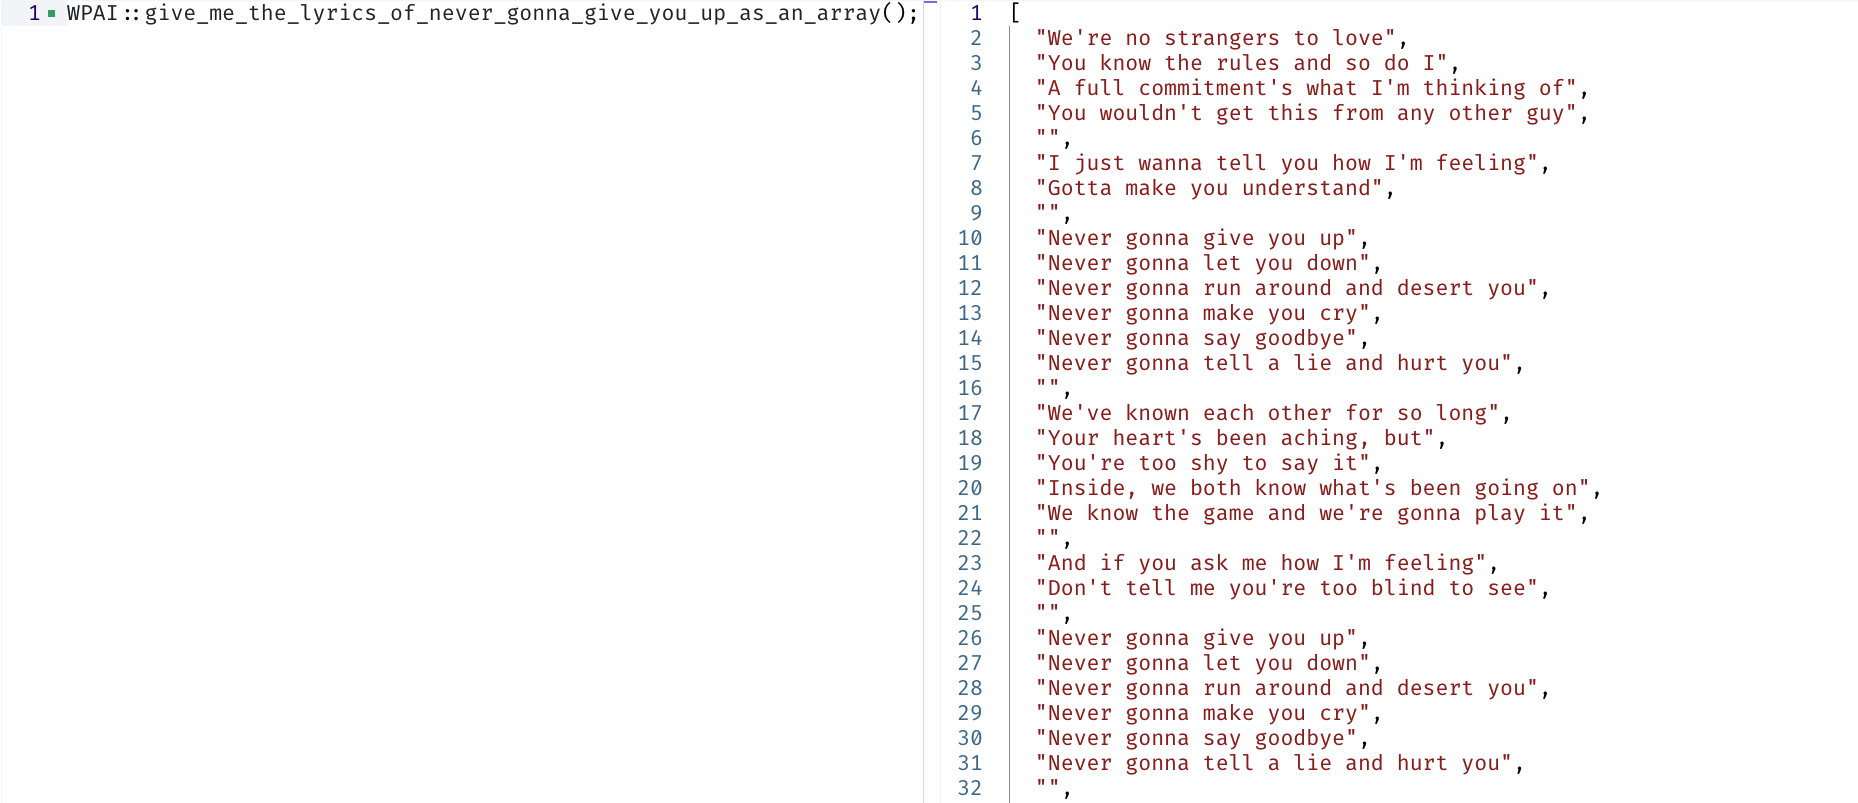 A screen grab of me using my magic methods AI to get a PHP function that prints the lyrics of Never Gonna Give You Up.